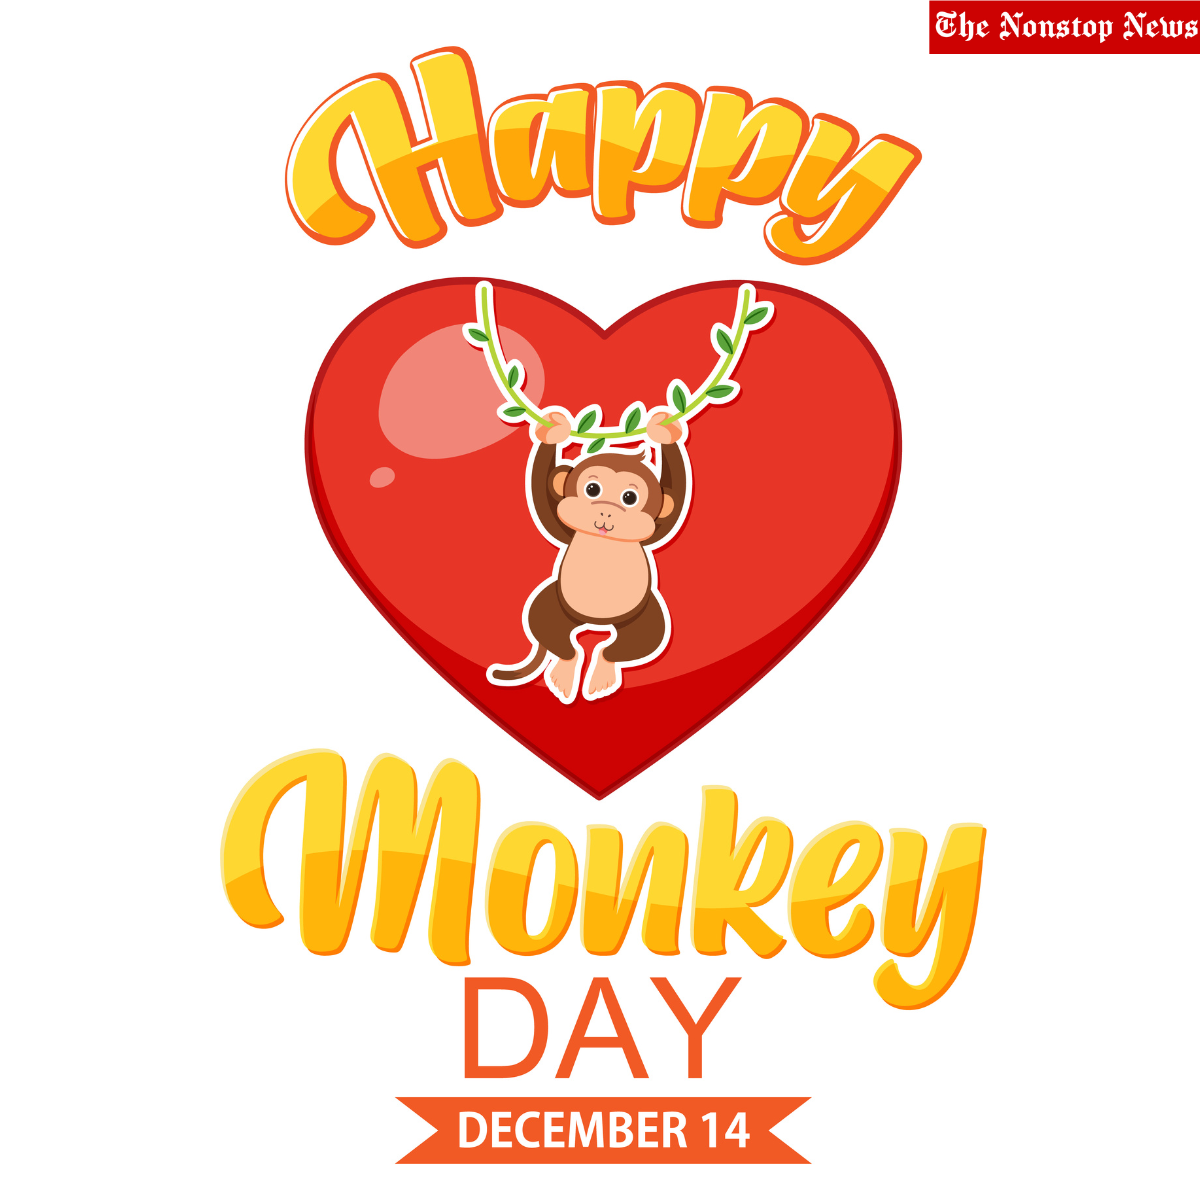 Monkey Day 2022 Quotes, Messages, Wishes, Greetings, Images, Posters, and Banners